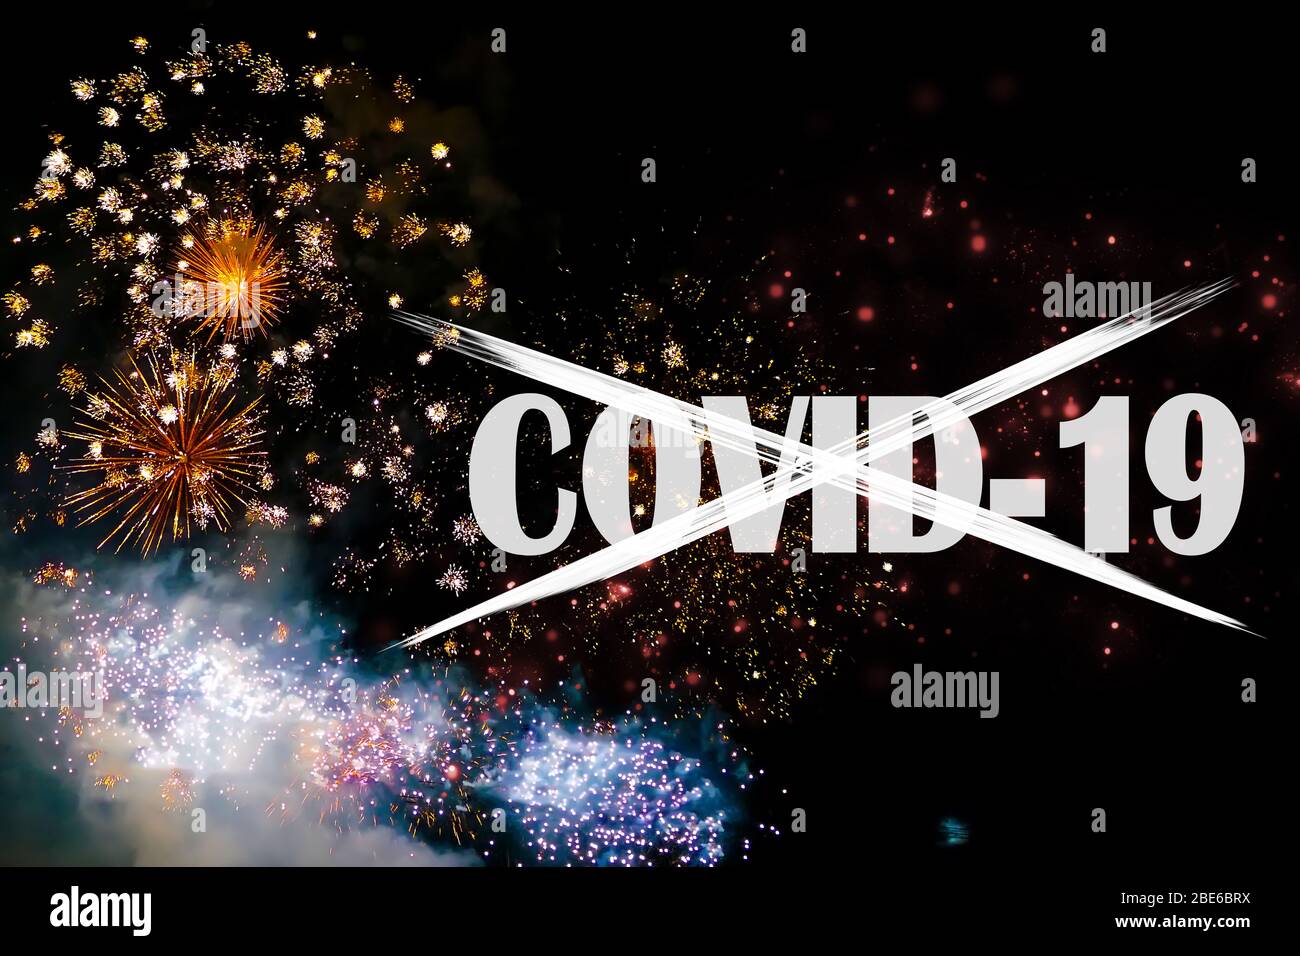 The end of the Covid-19 - Corona Pandemie with fireworks on black background Stock Photo